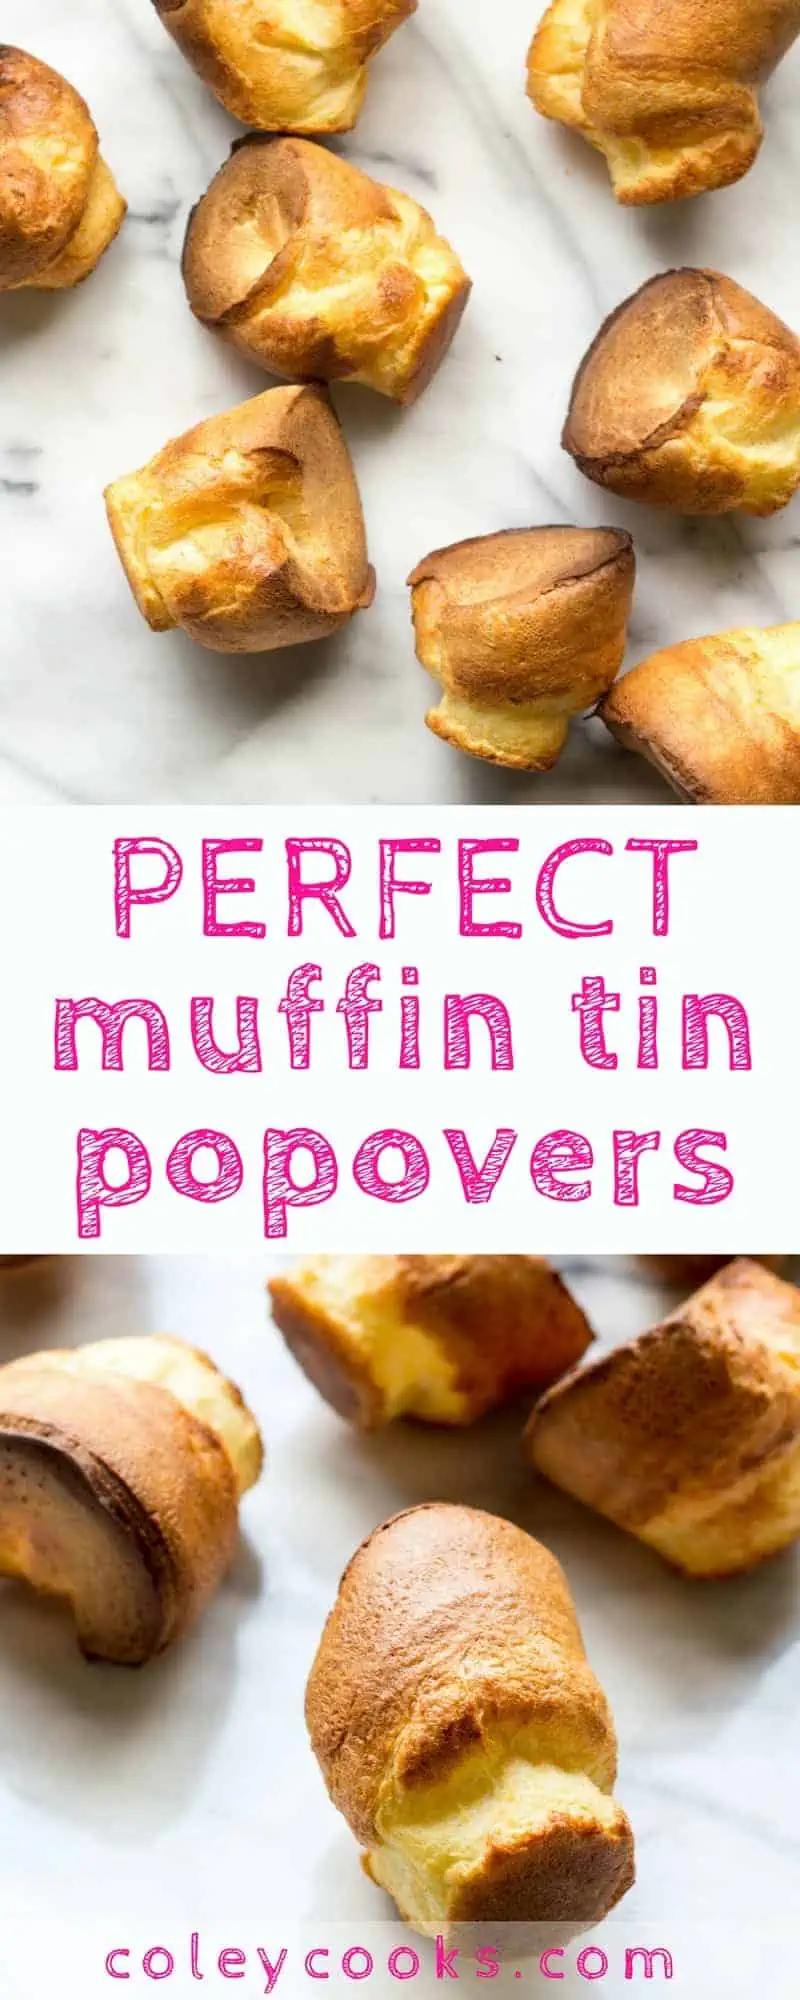 PERFECT MUFFIN TIN POPOVERS | This easy popover recipe is made in muffin tins! They come out tender and light, and they make the best brunch, appetizer, or side. | ColeyCooks.com